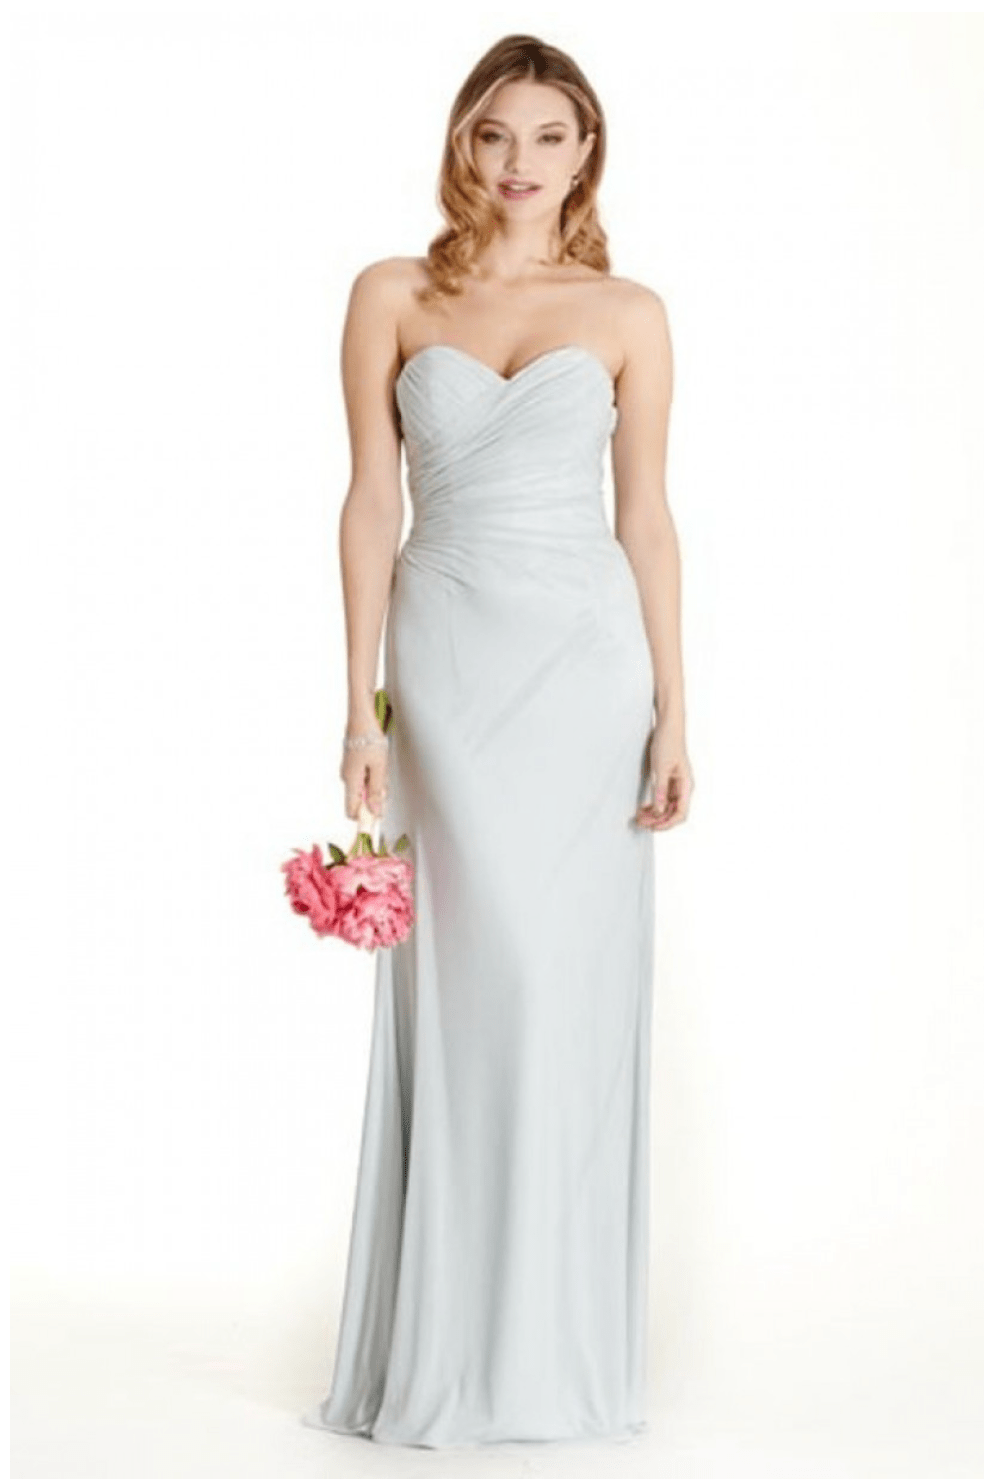 Strapless Ruched Dress by Aspeed - NORMA REED